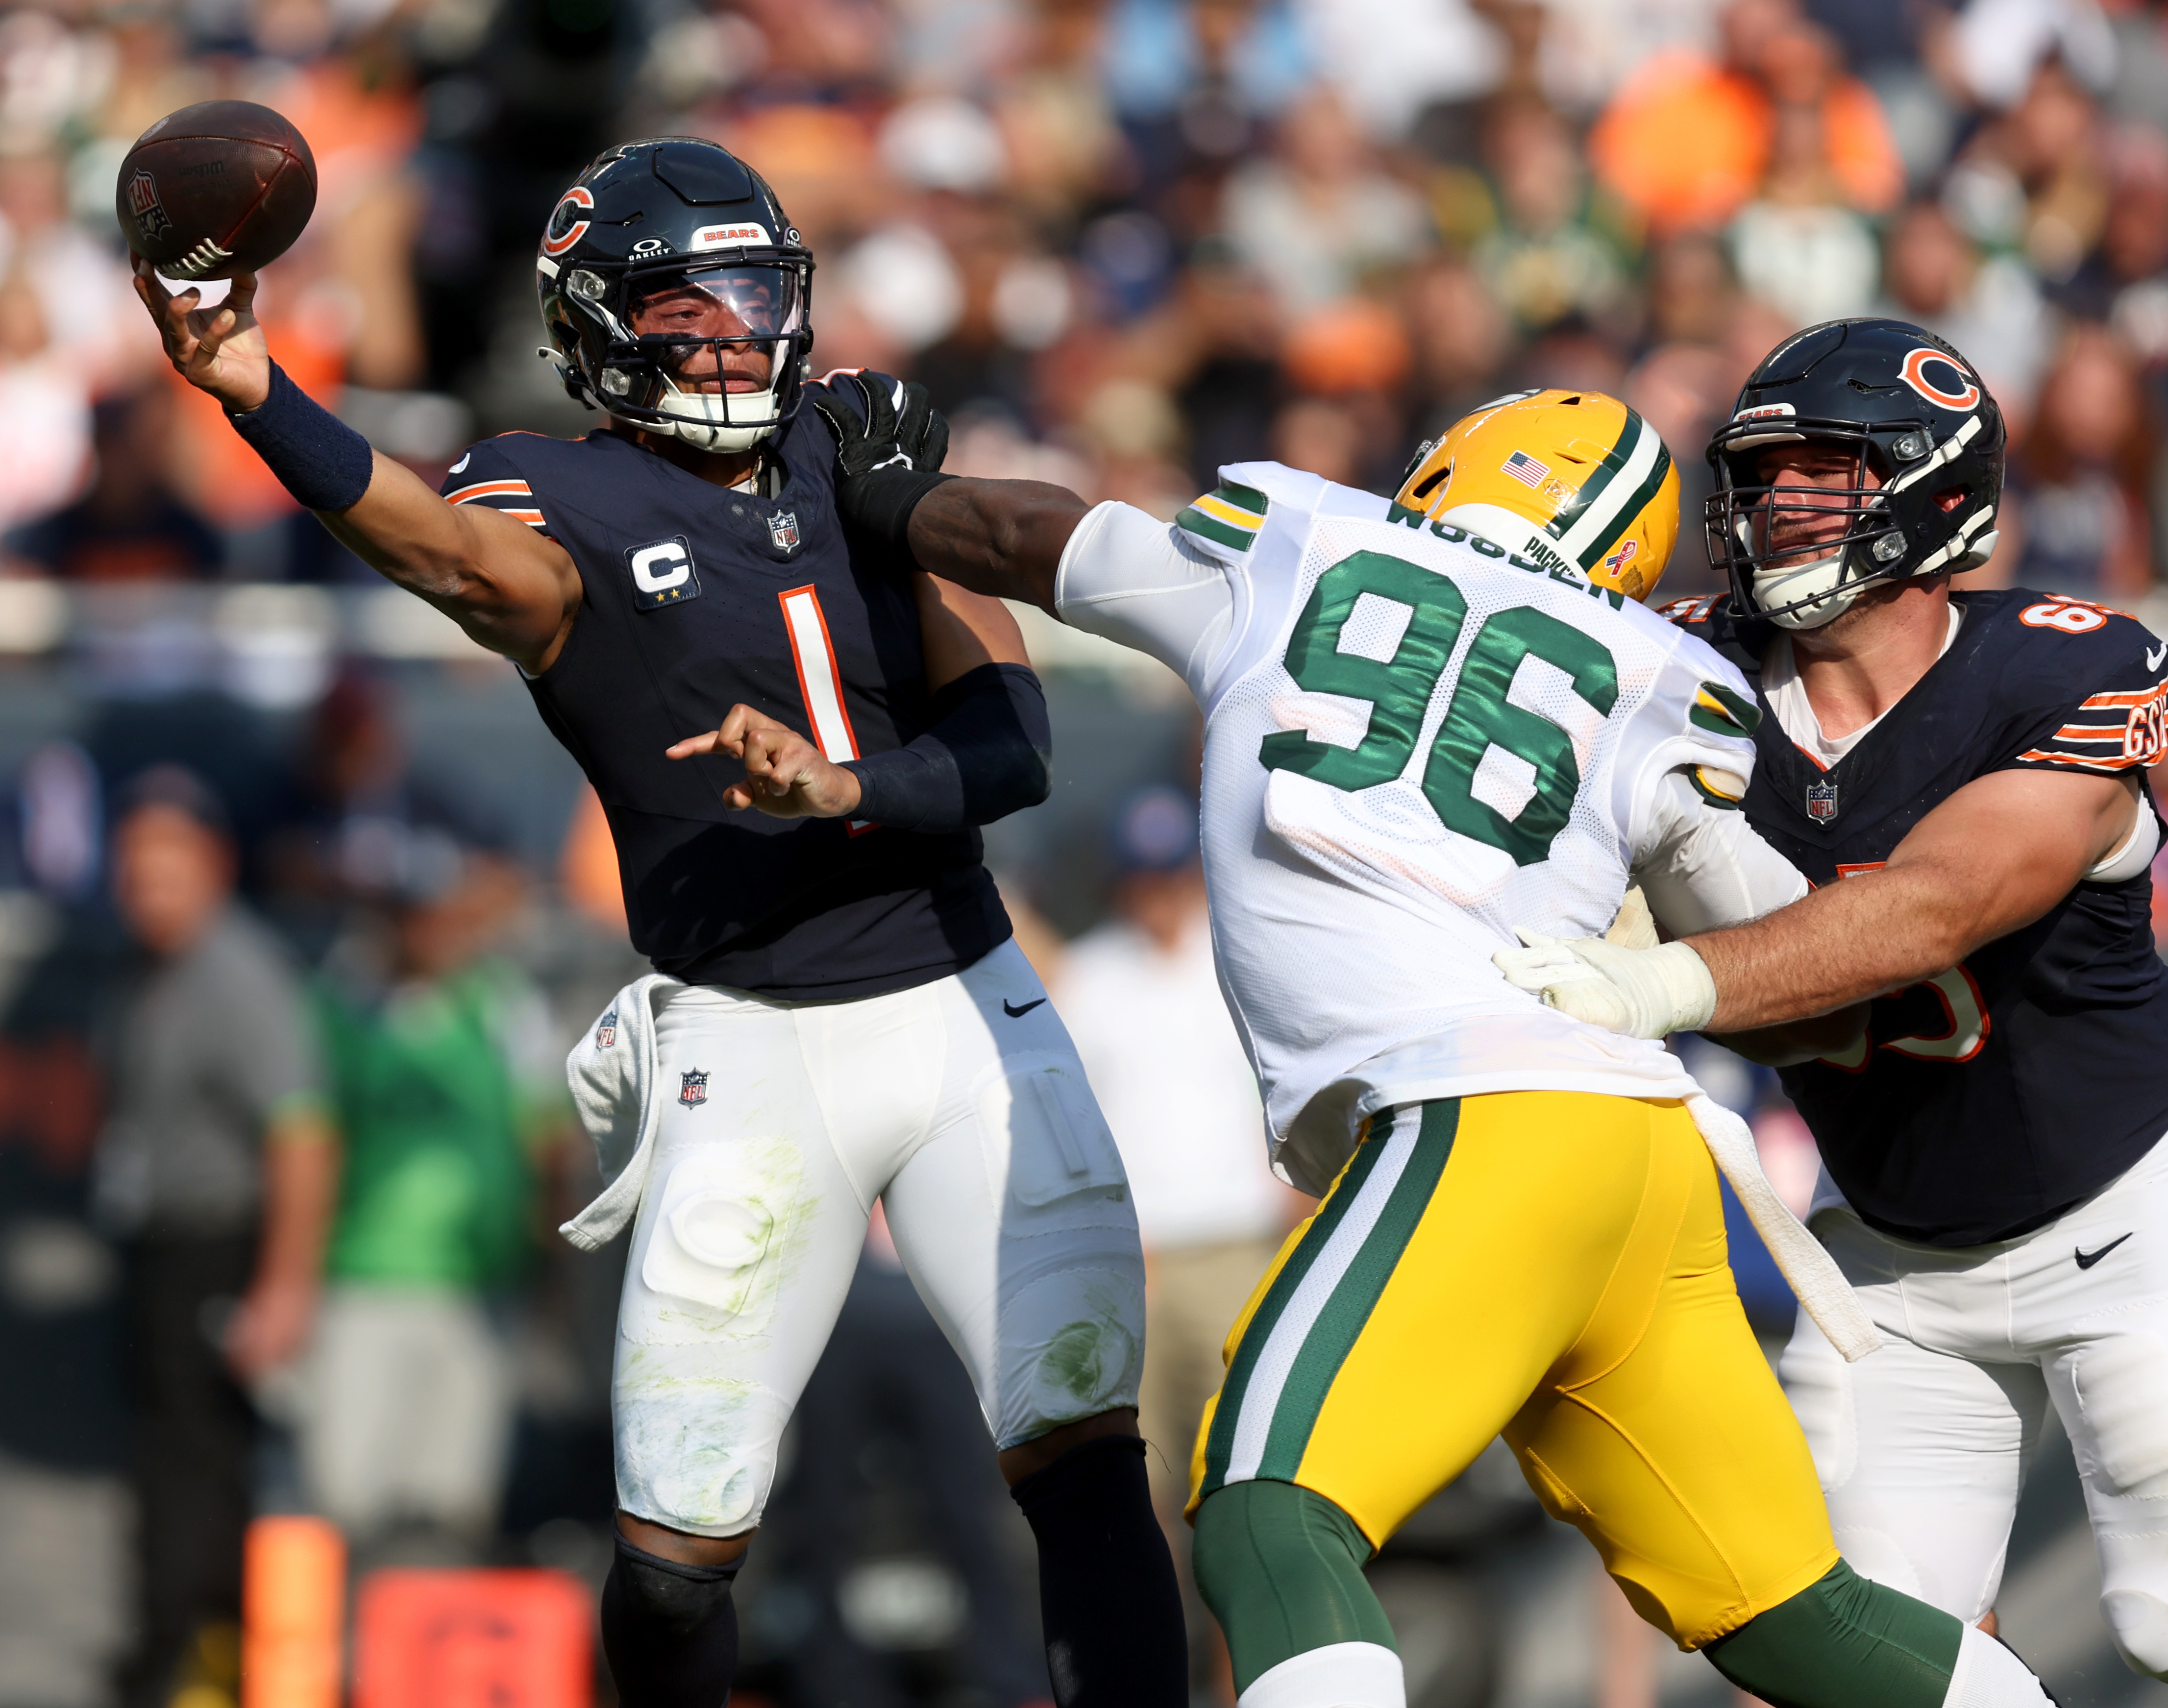 RECAP: Chicago Bears fall 28-19 to Green Bay Packers at Soldier